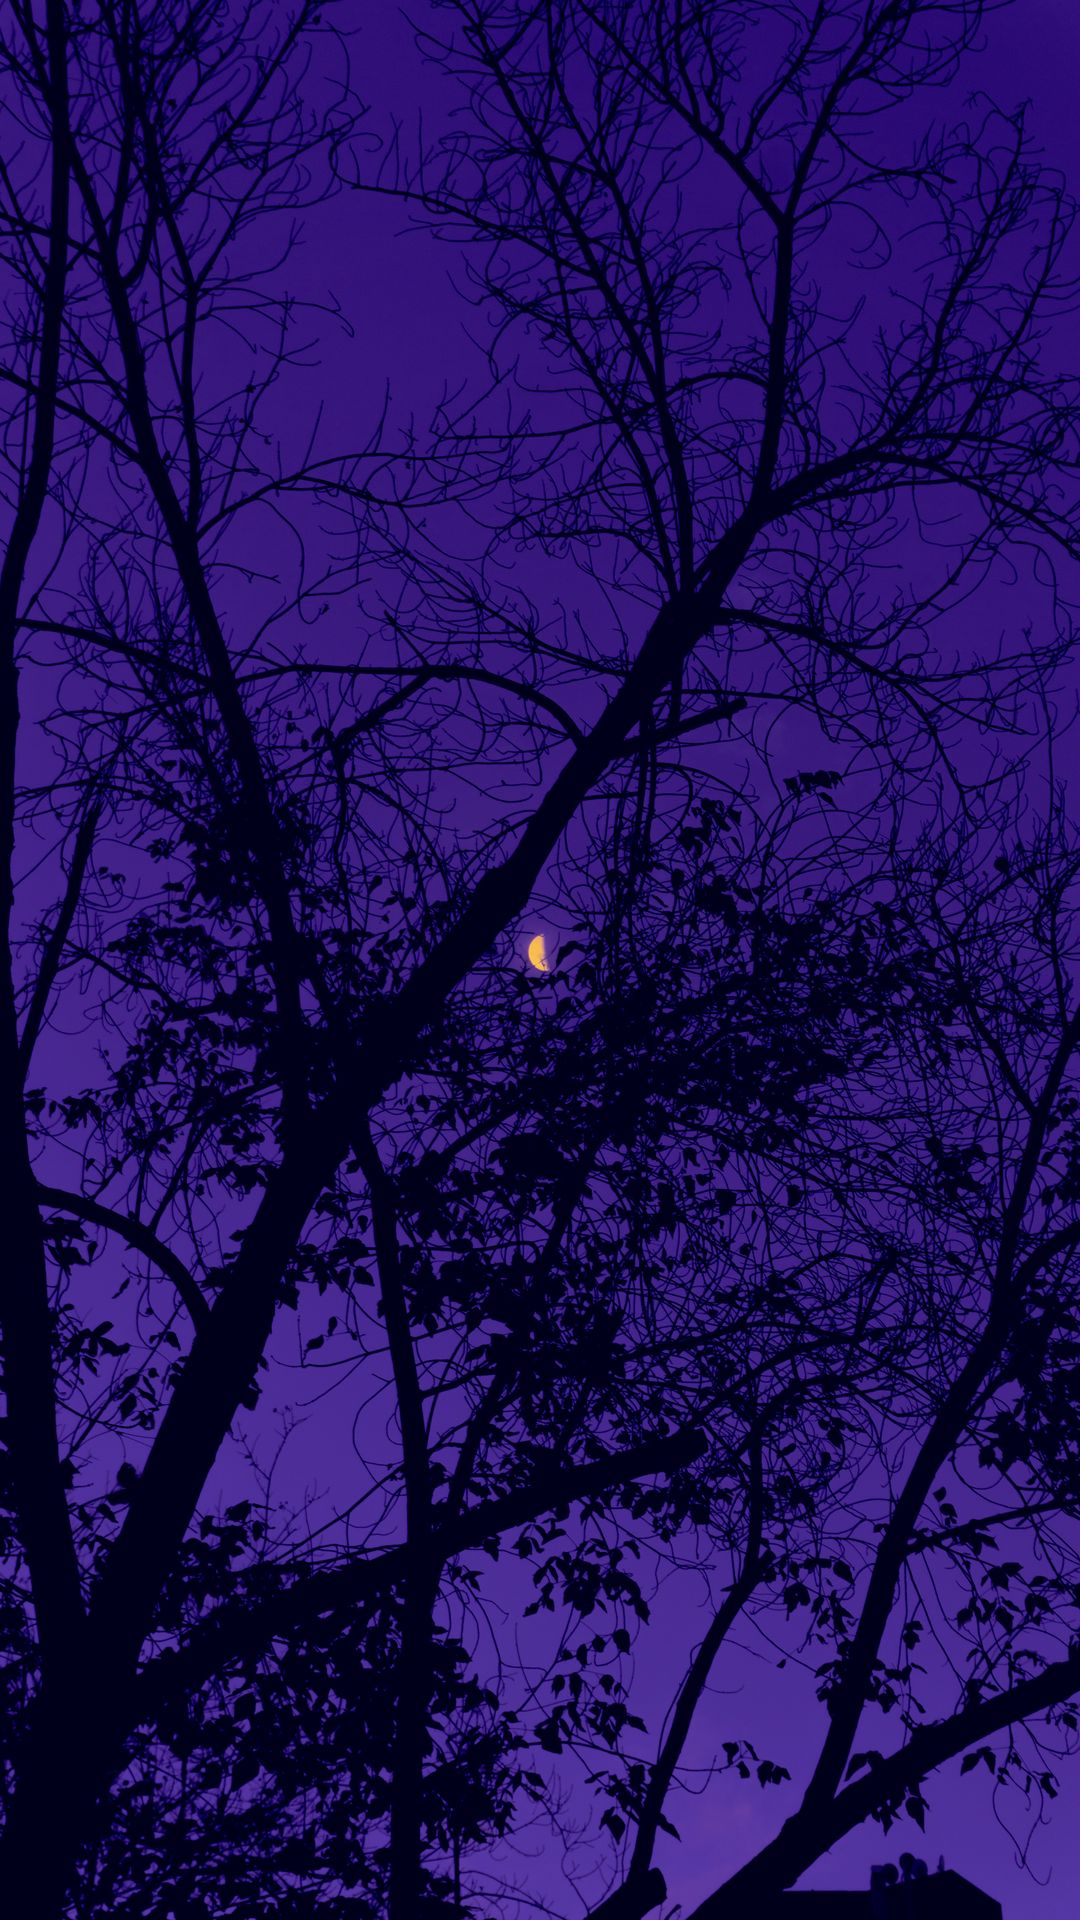 A purple sky with a half moon and tree branches - Dark purple